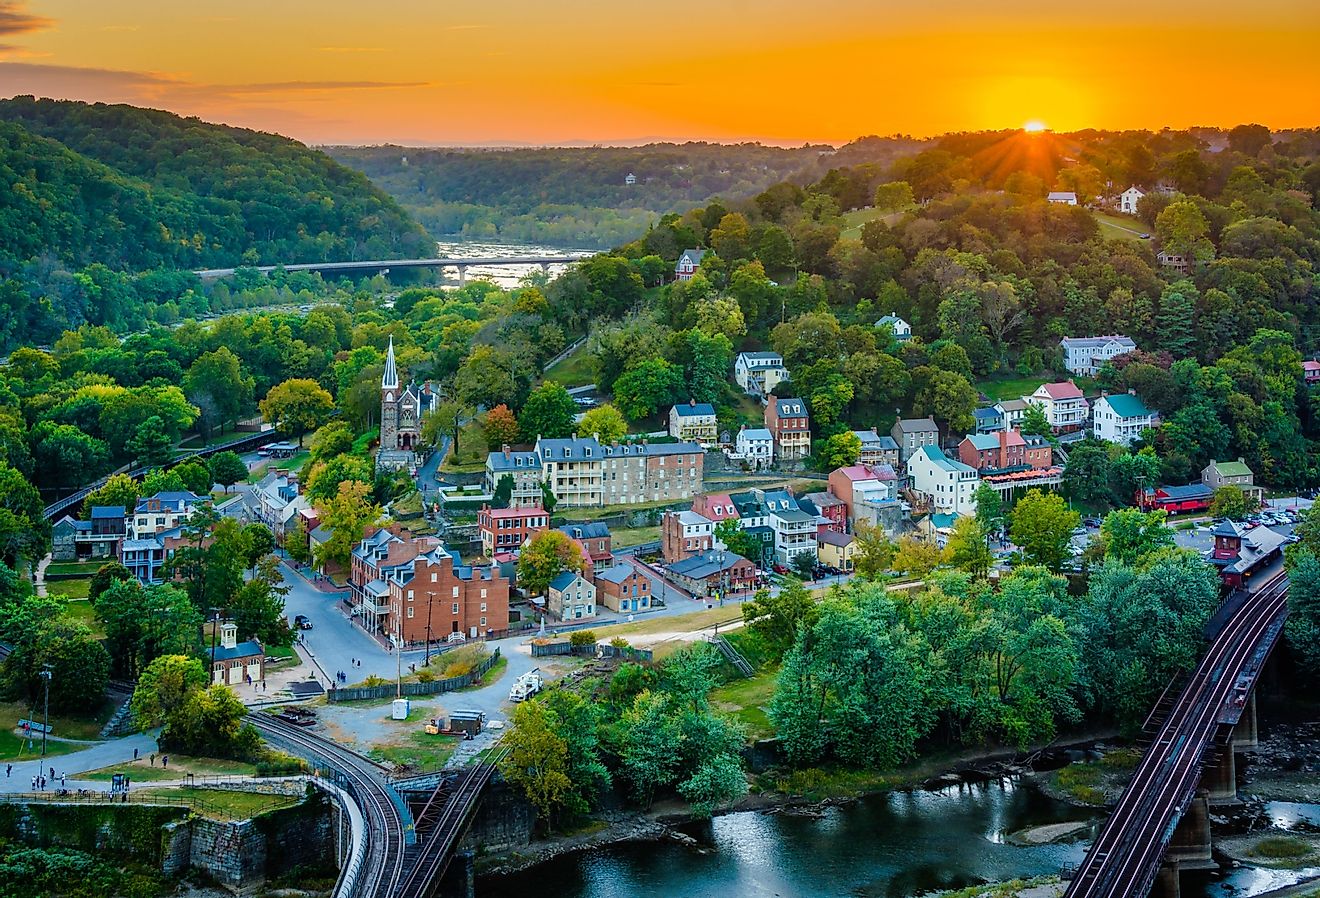 Sunset view of Harpers Ferry, West Virginia from Maryland Heights.